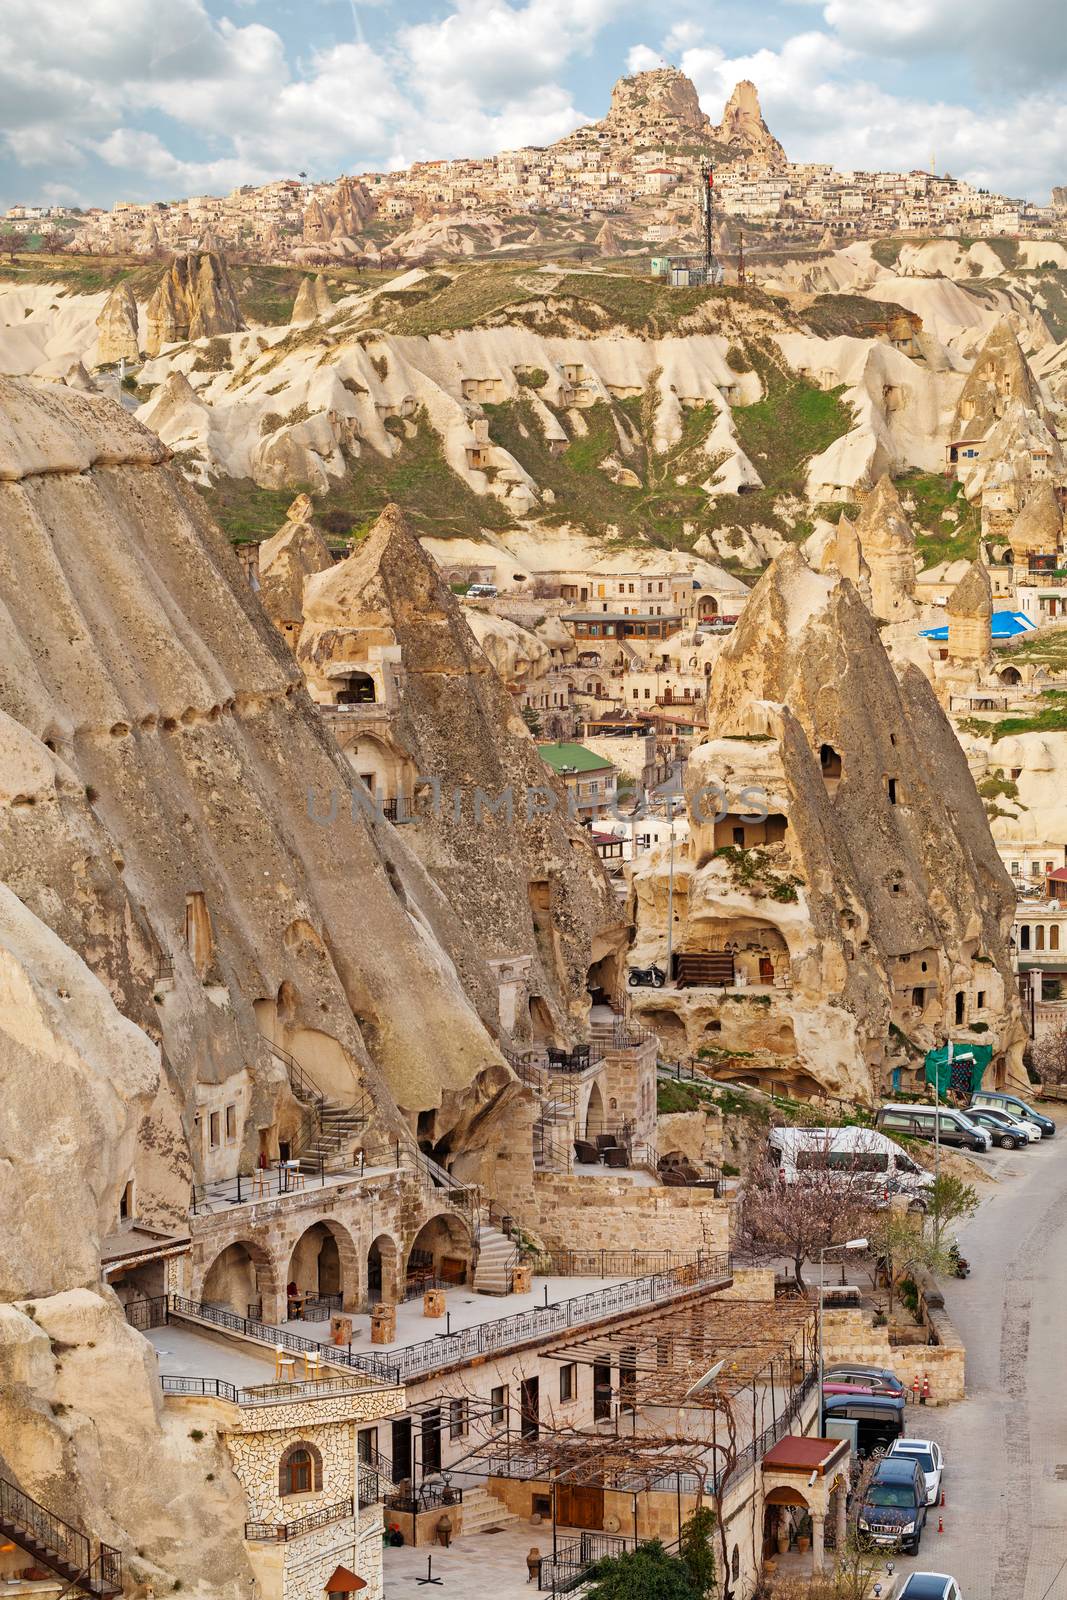 Houses and hotels located in rocky caves in Goreme city, Capadokkia